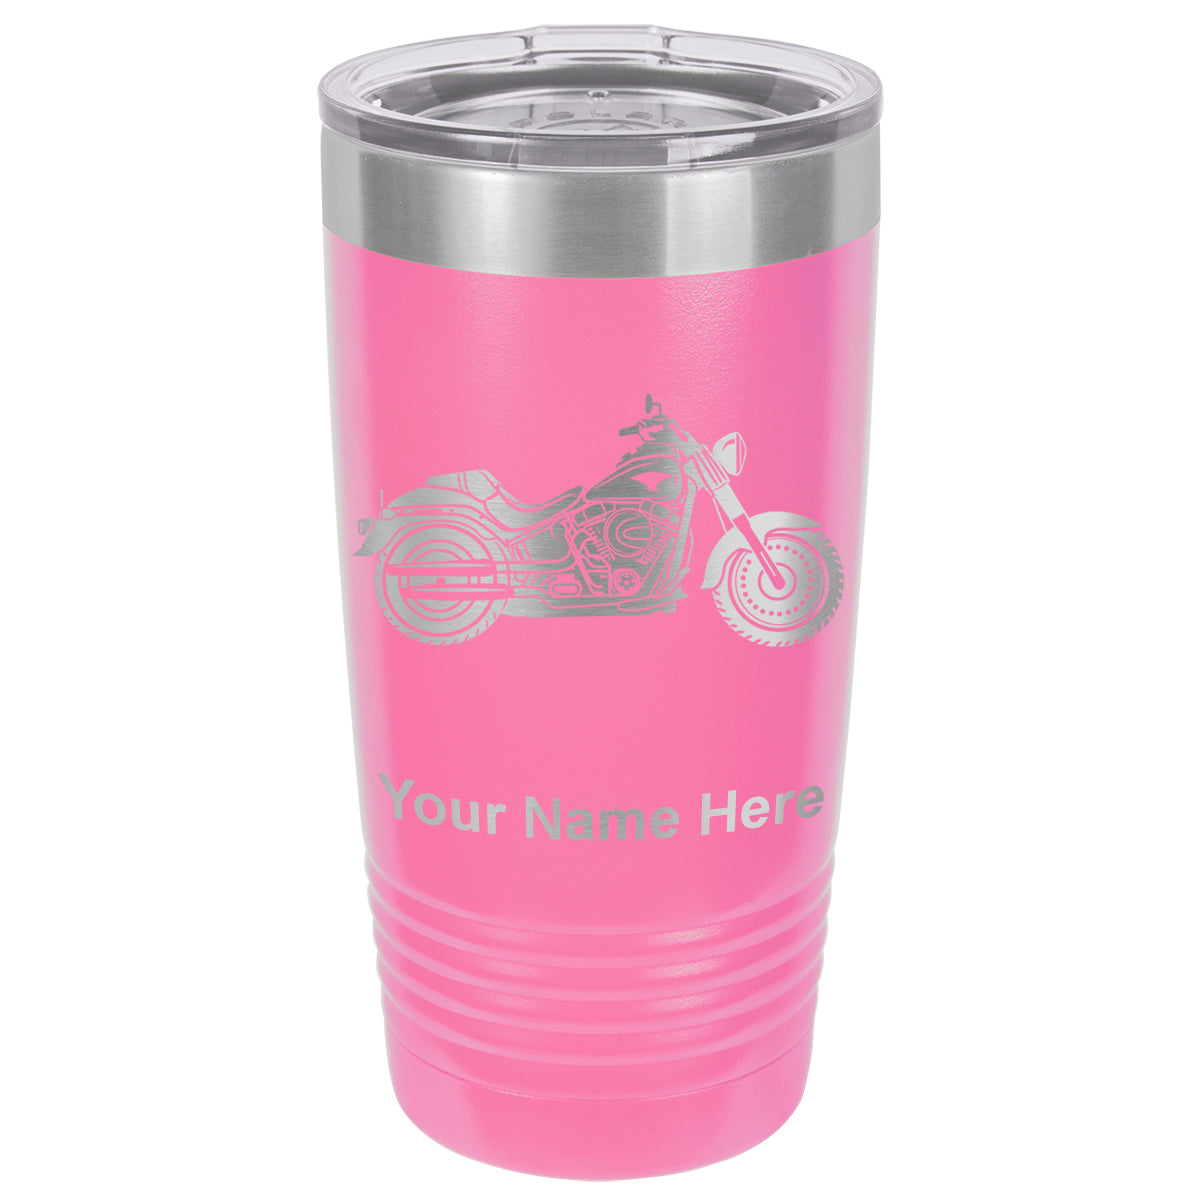 20oz Vacuum Insulated Tumbler Mug, Motorcycle, Personalized Engraving Included